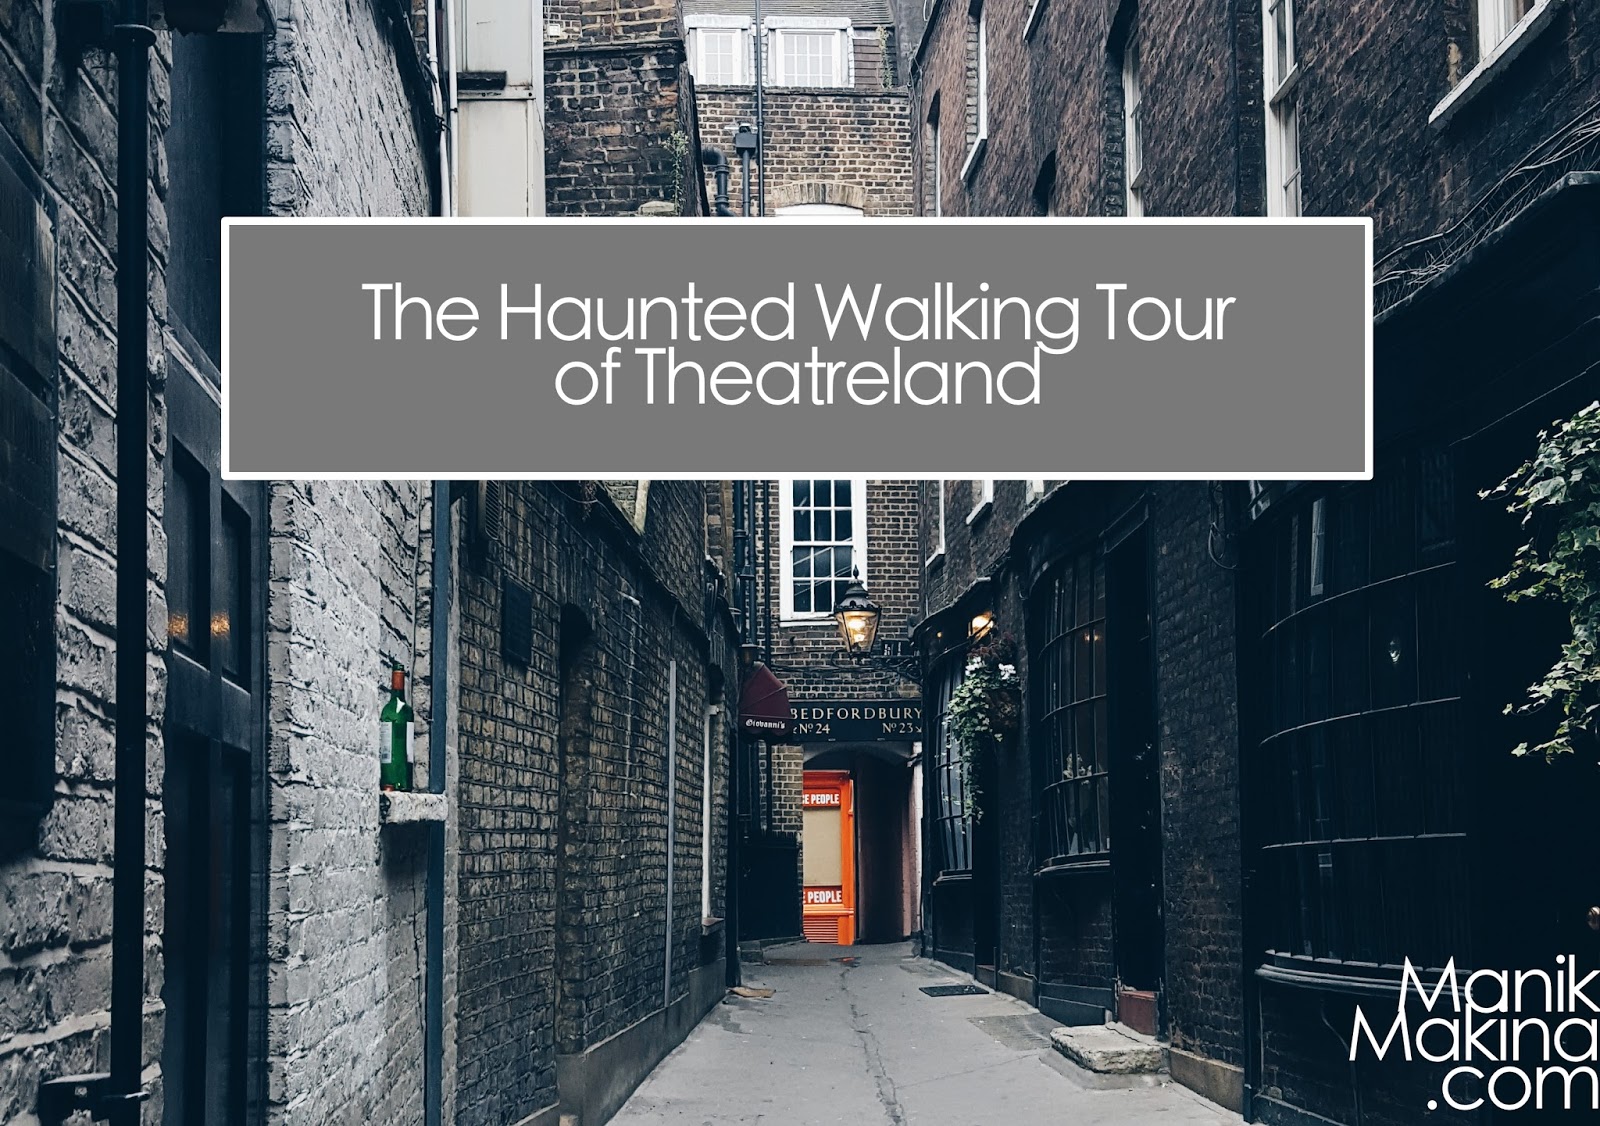 The Haunted Walking Tour of London